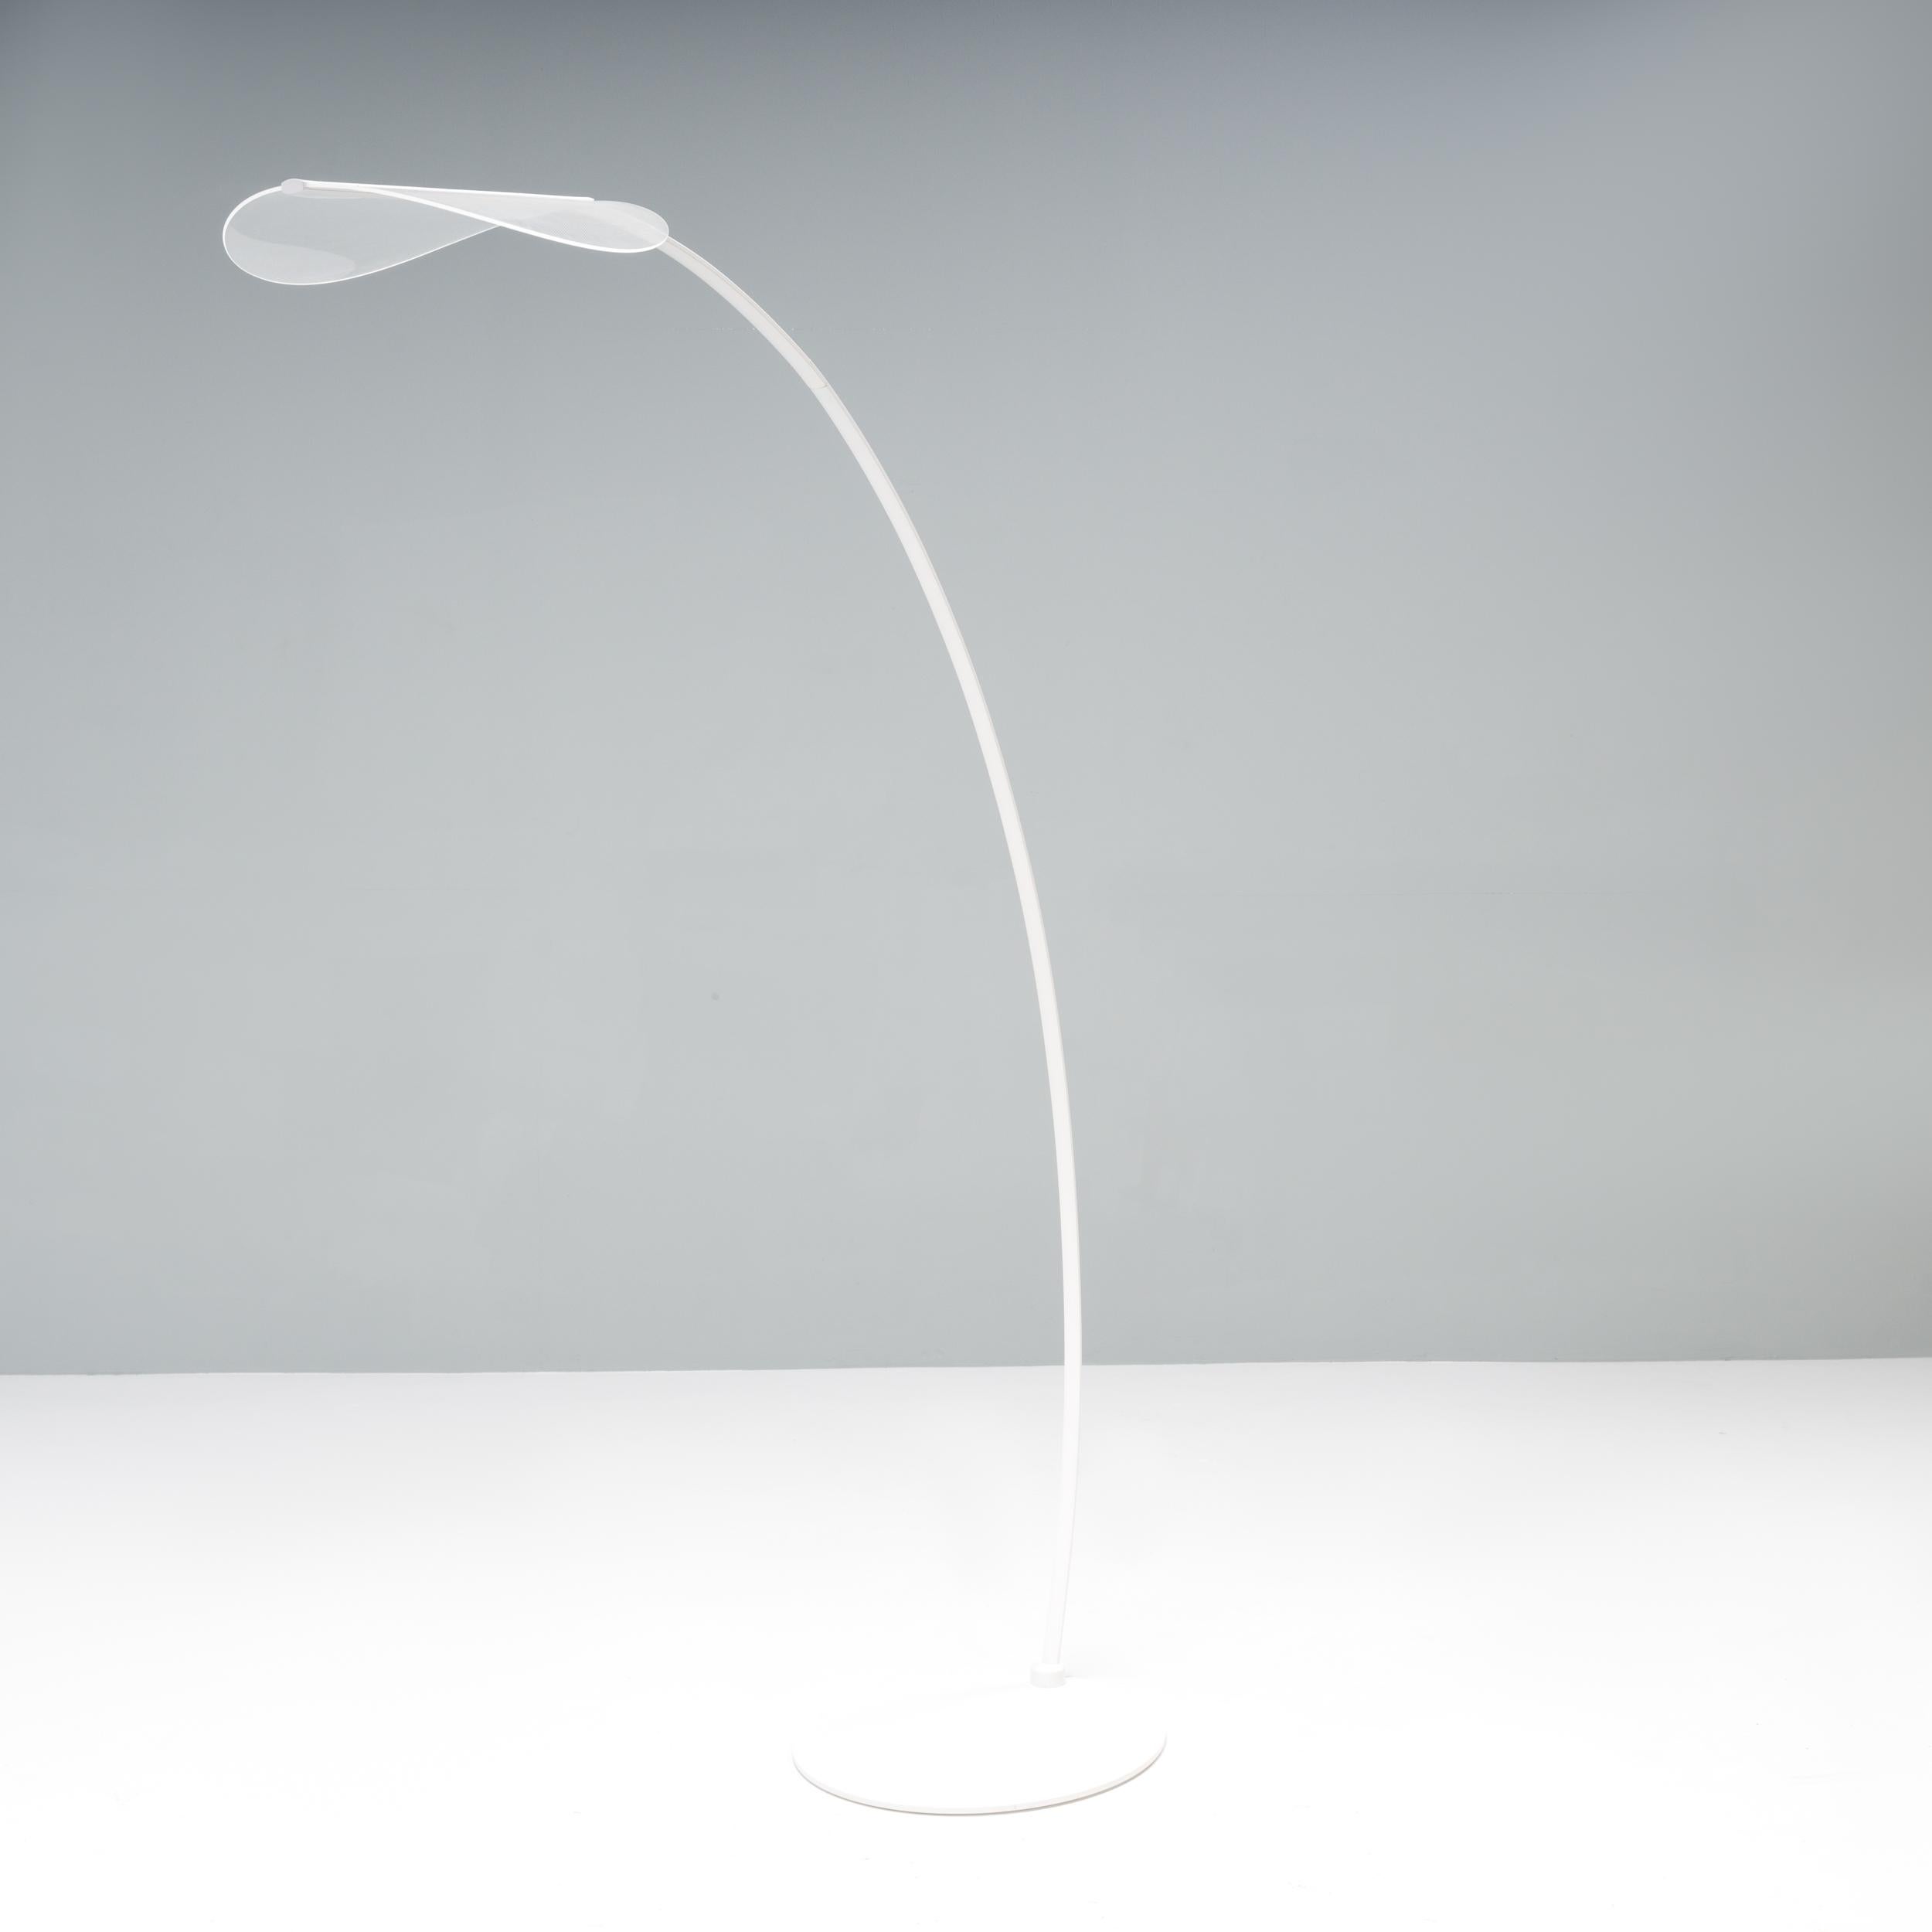 Originally designed by Mirco Crosatto for Stilnovo in 2012, the Diphy floor lamp is a stunning example of modern lighting design.

Sitting on a flat round base, the lamp features a long white metal rod that curves out in a cantilever fashion,